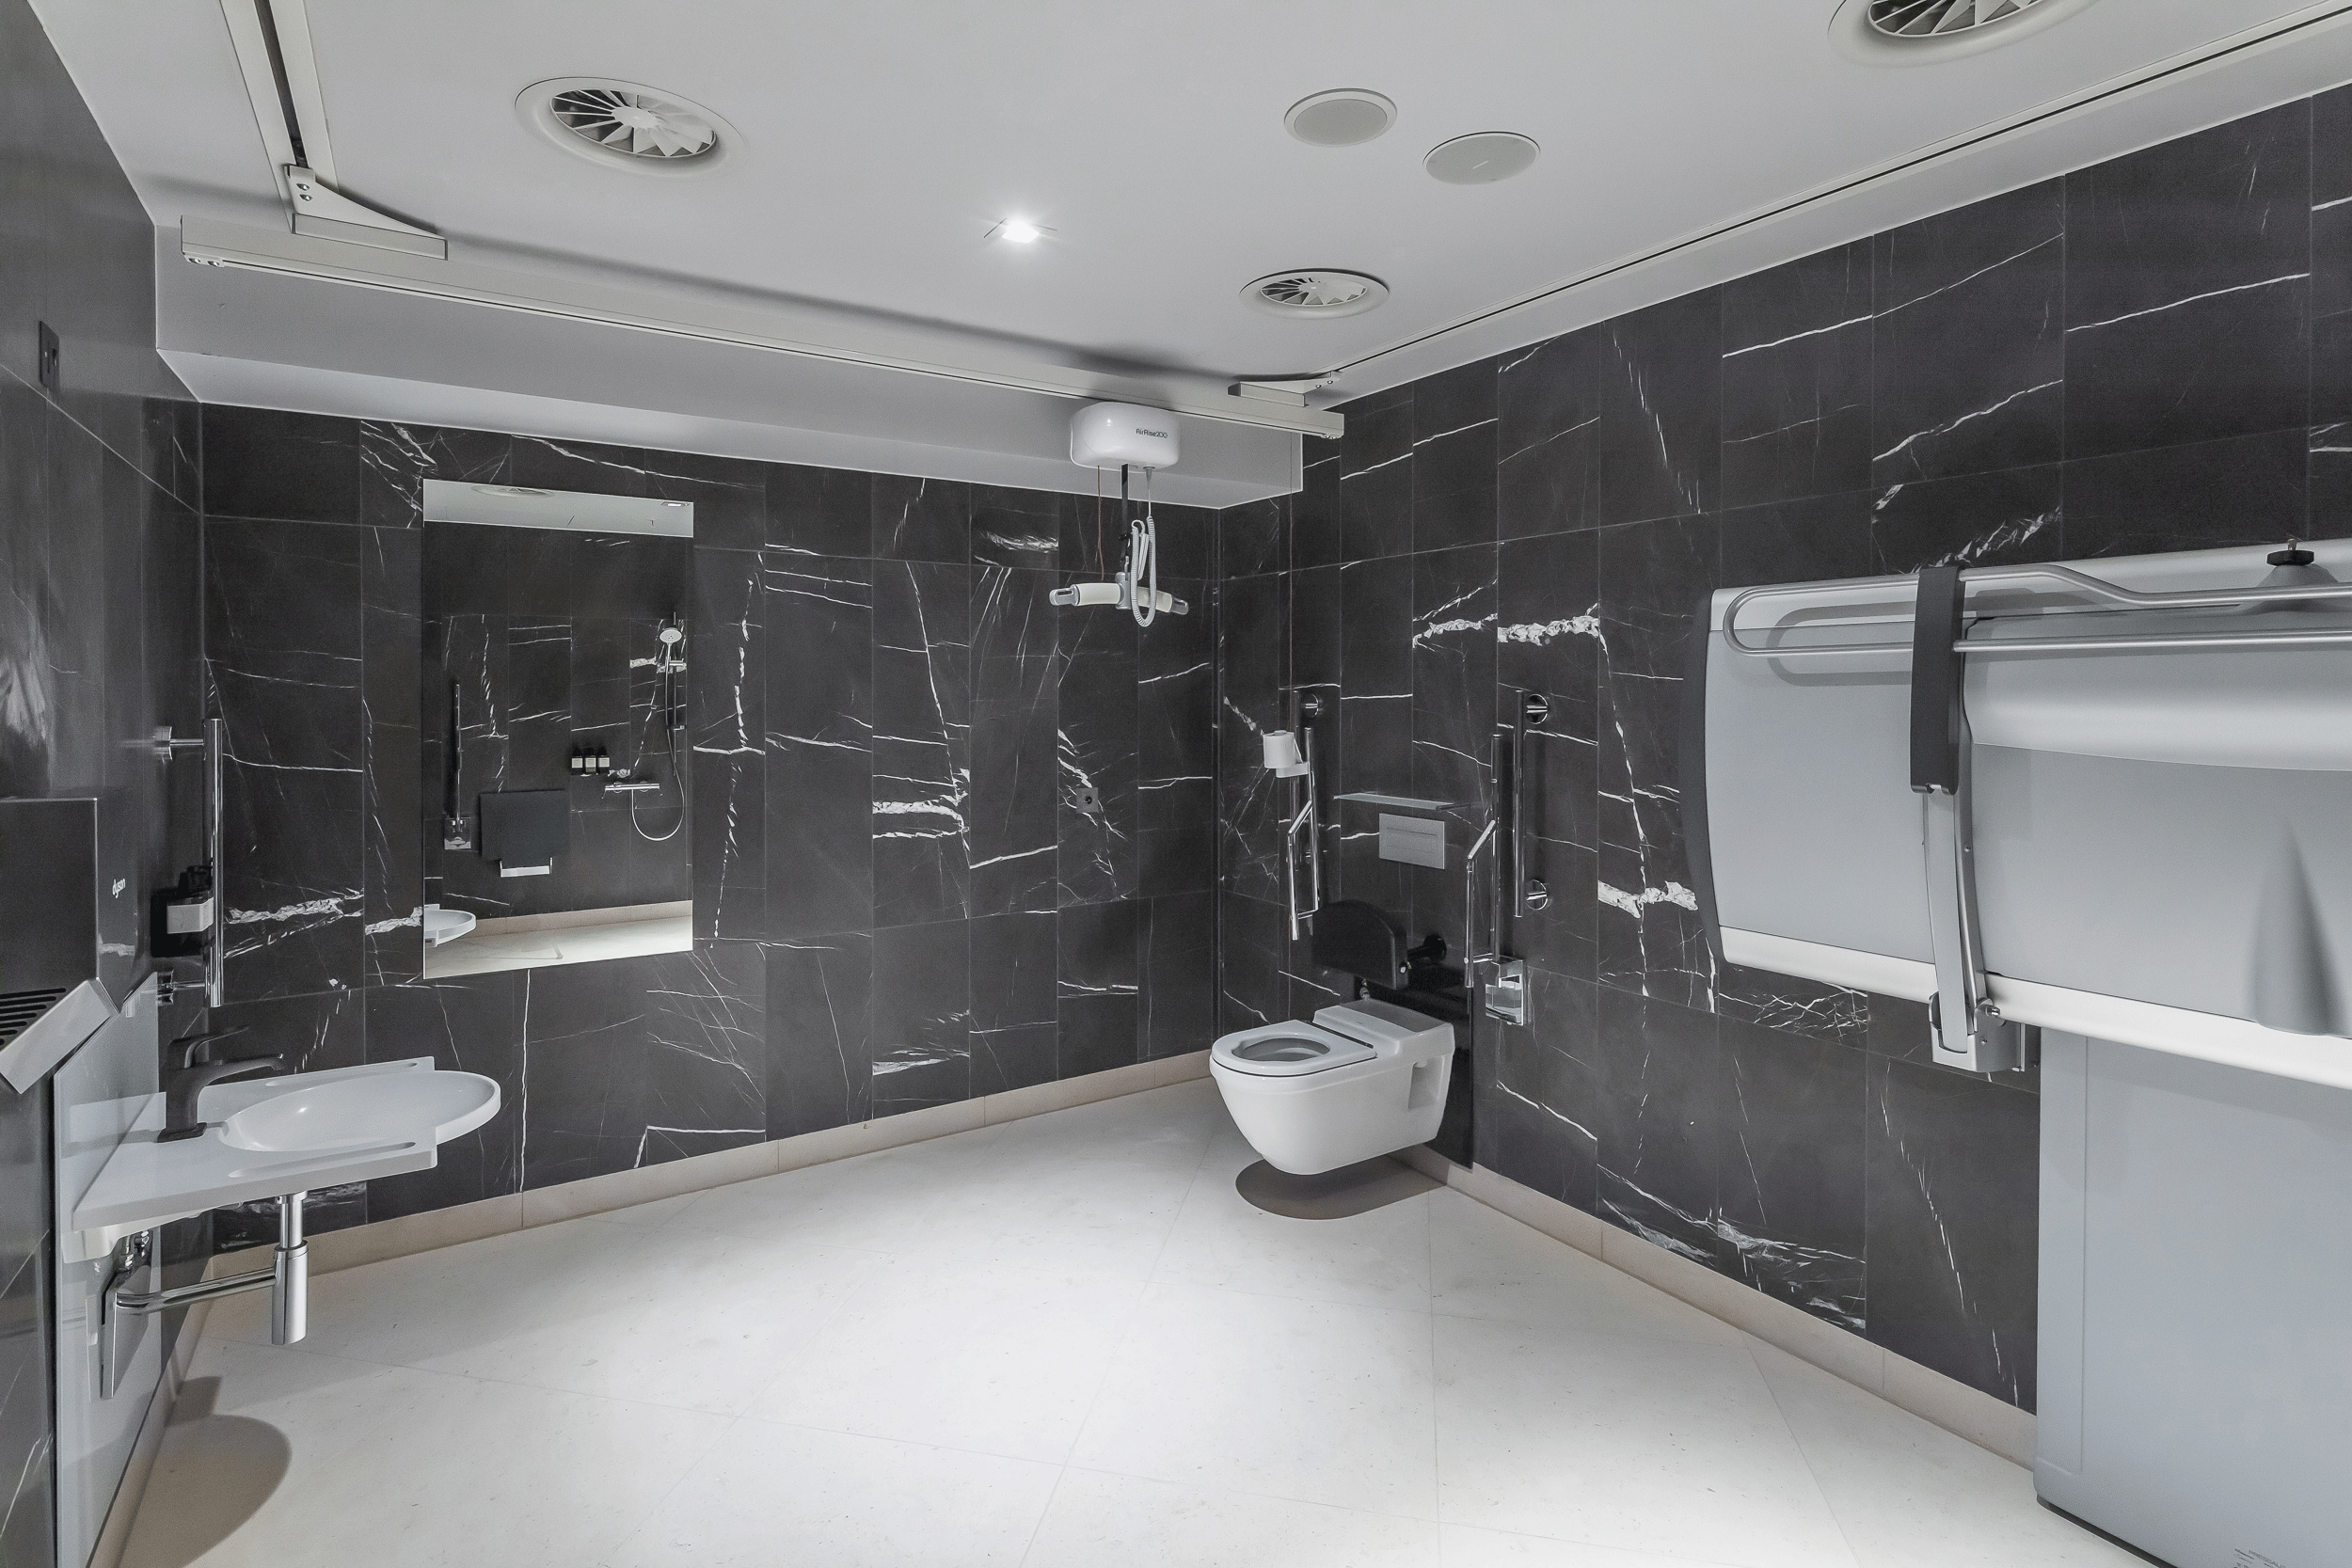 Example of Changing Places and hoist in accessible bathroom